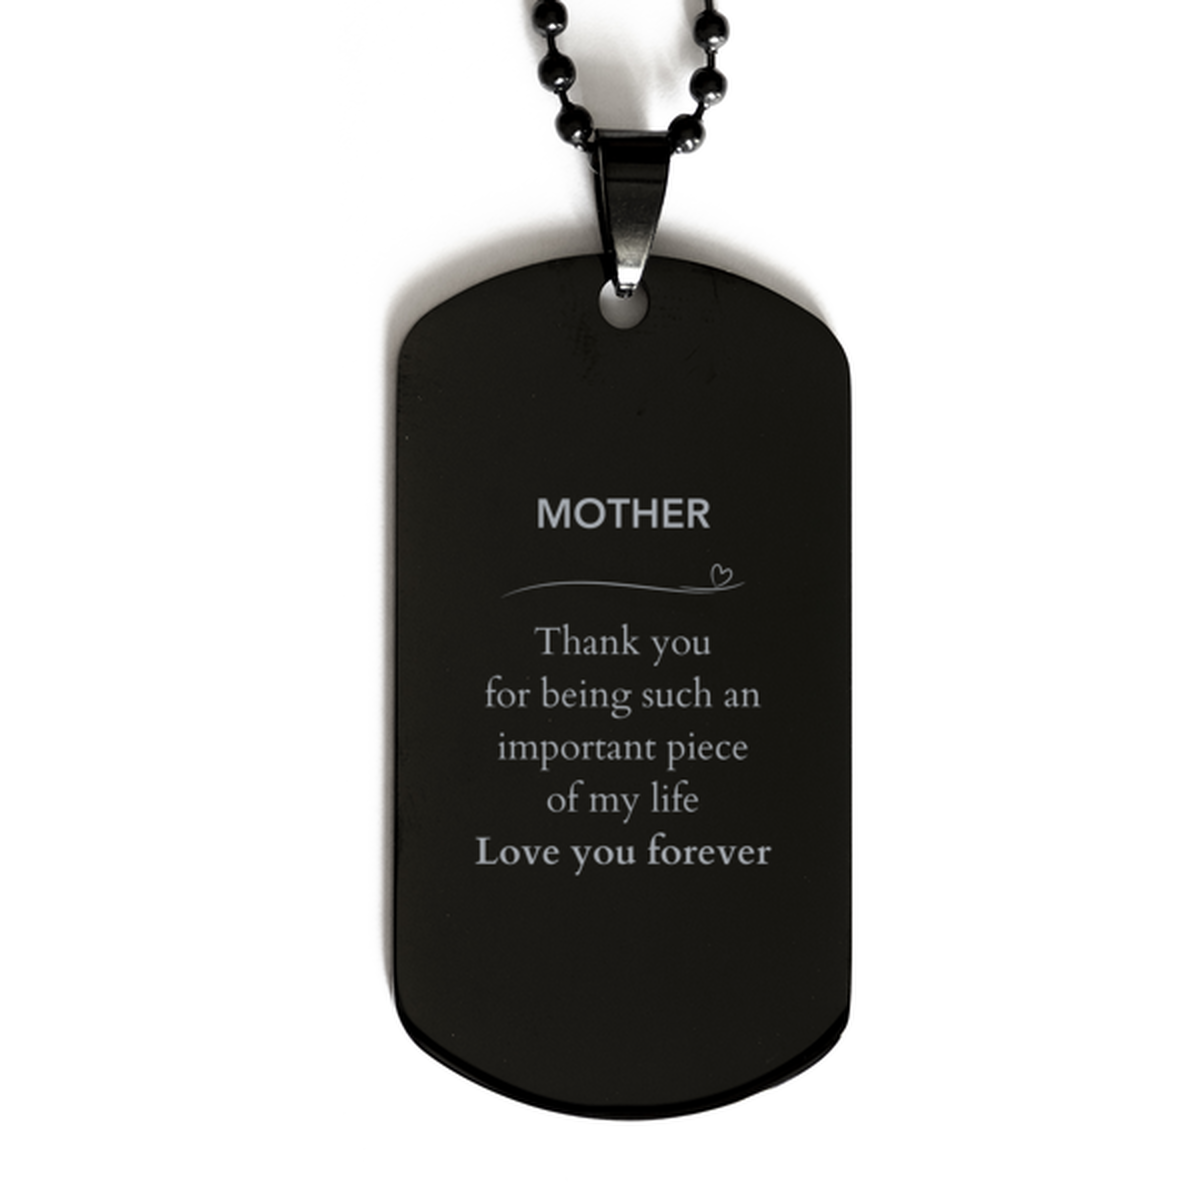 Appropriate Mother Black Dog Tag Epic Birthday Gifts for Mother Thank you for being such an important piece of my life Mother Christmas Mothers Fathers Day